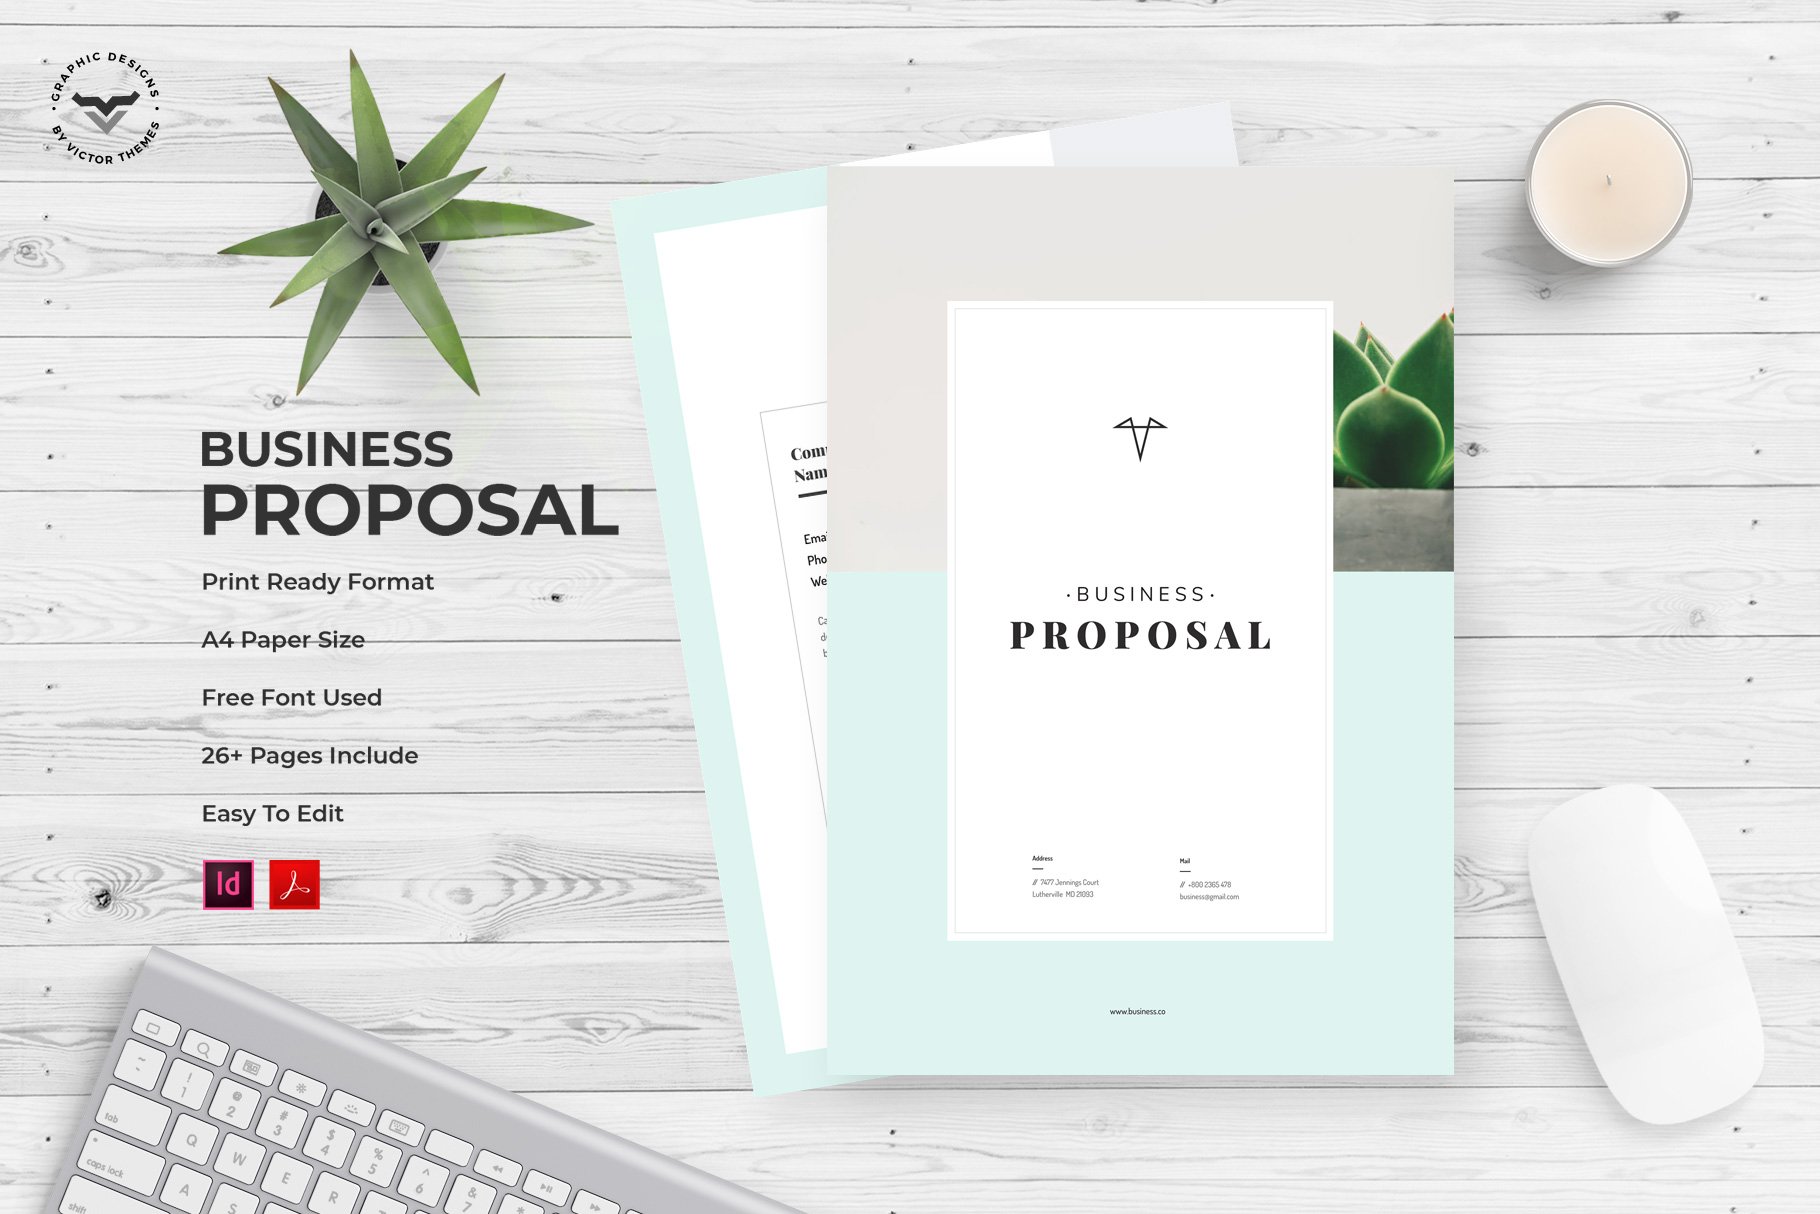 Minimal Business Proposal Template cover image.